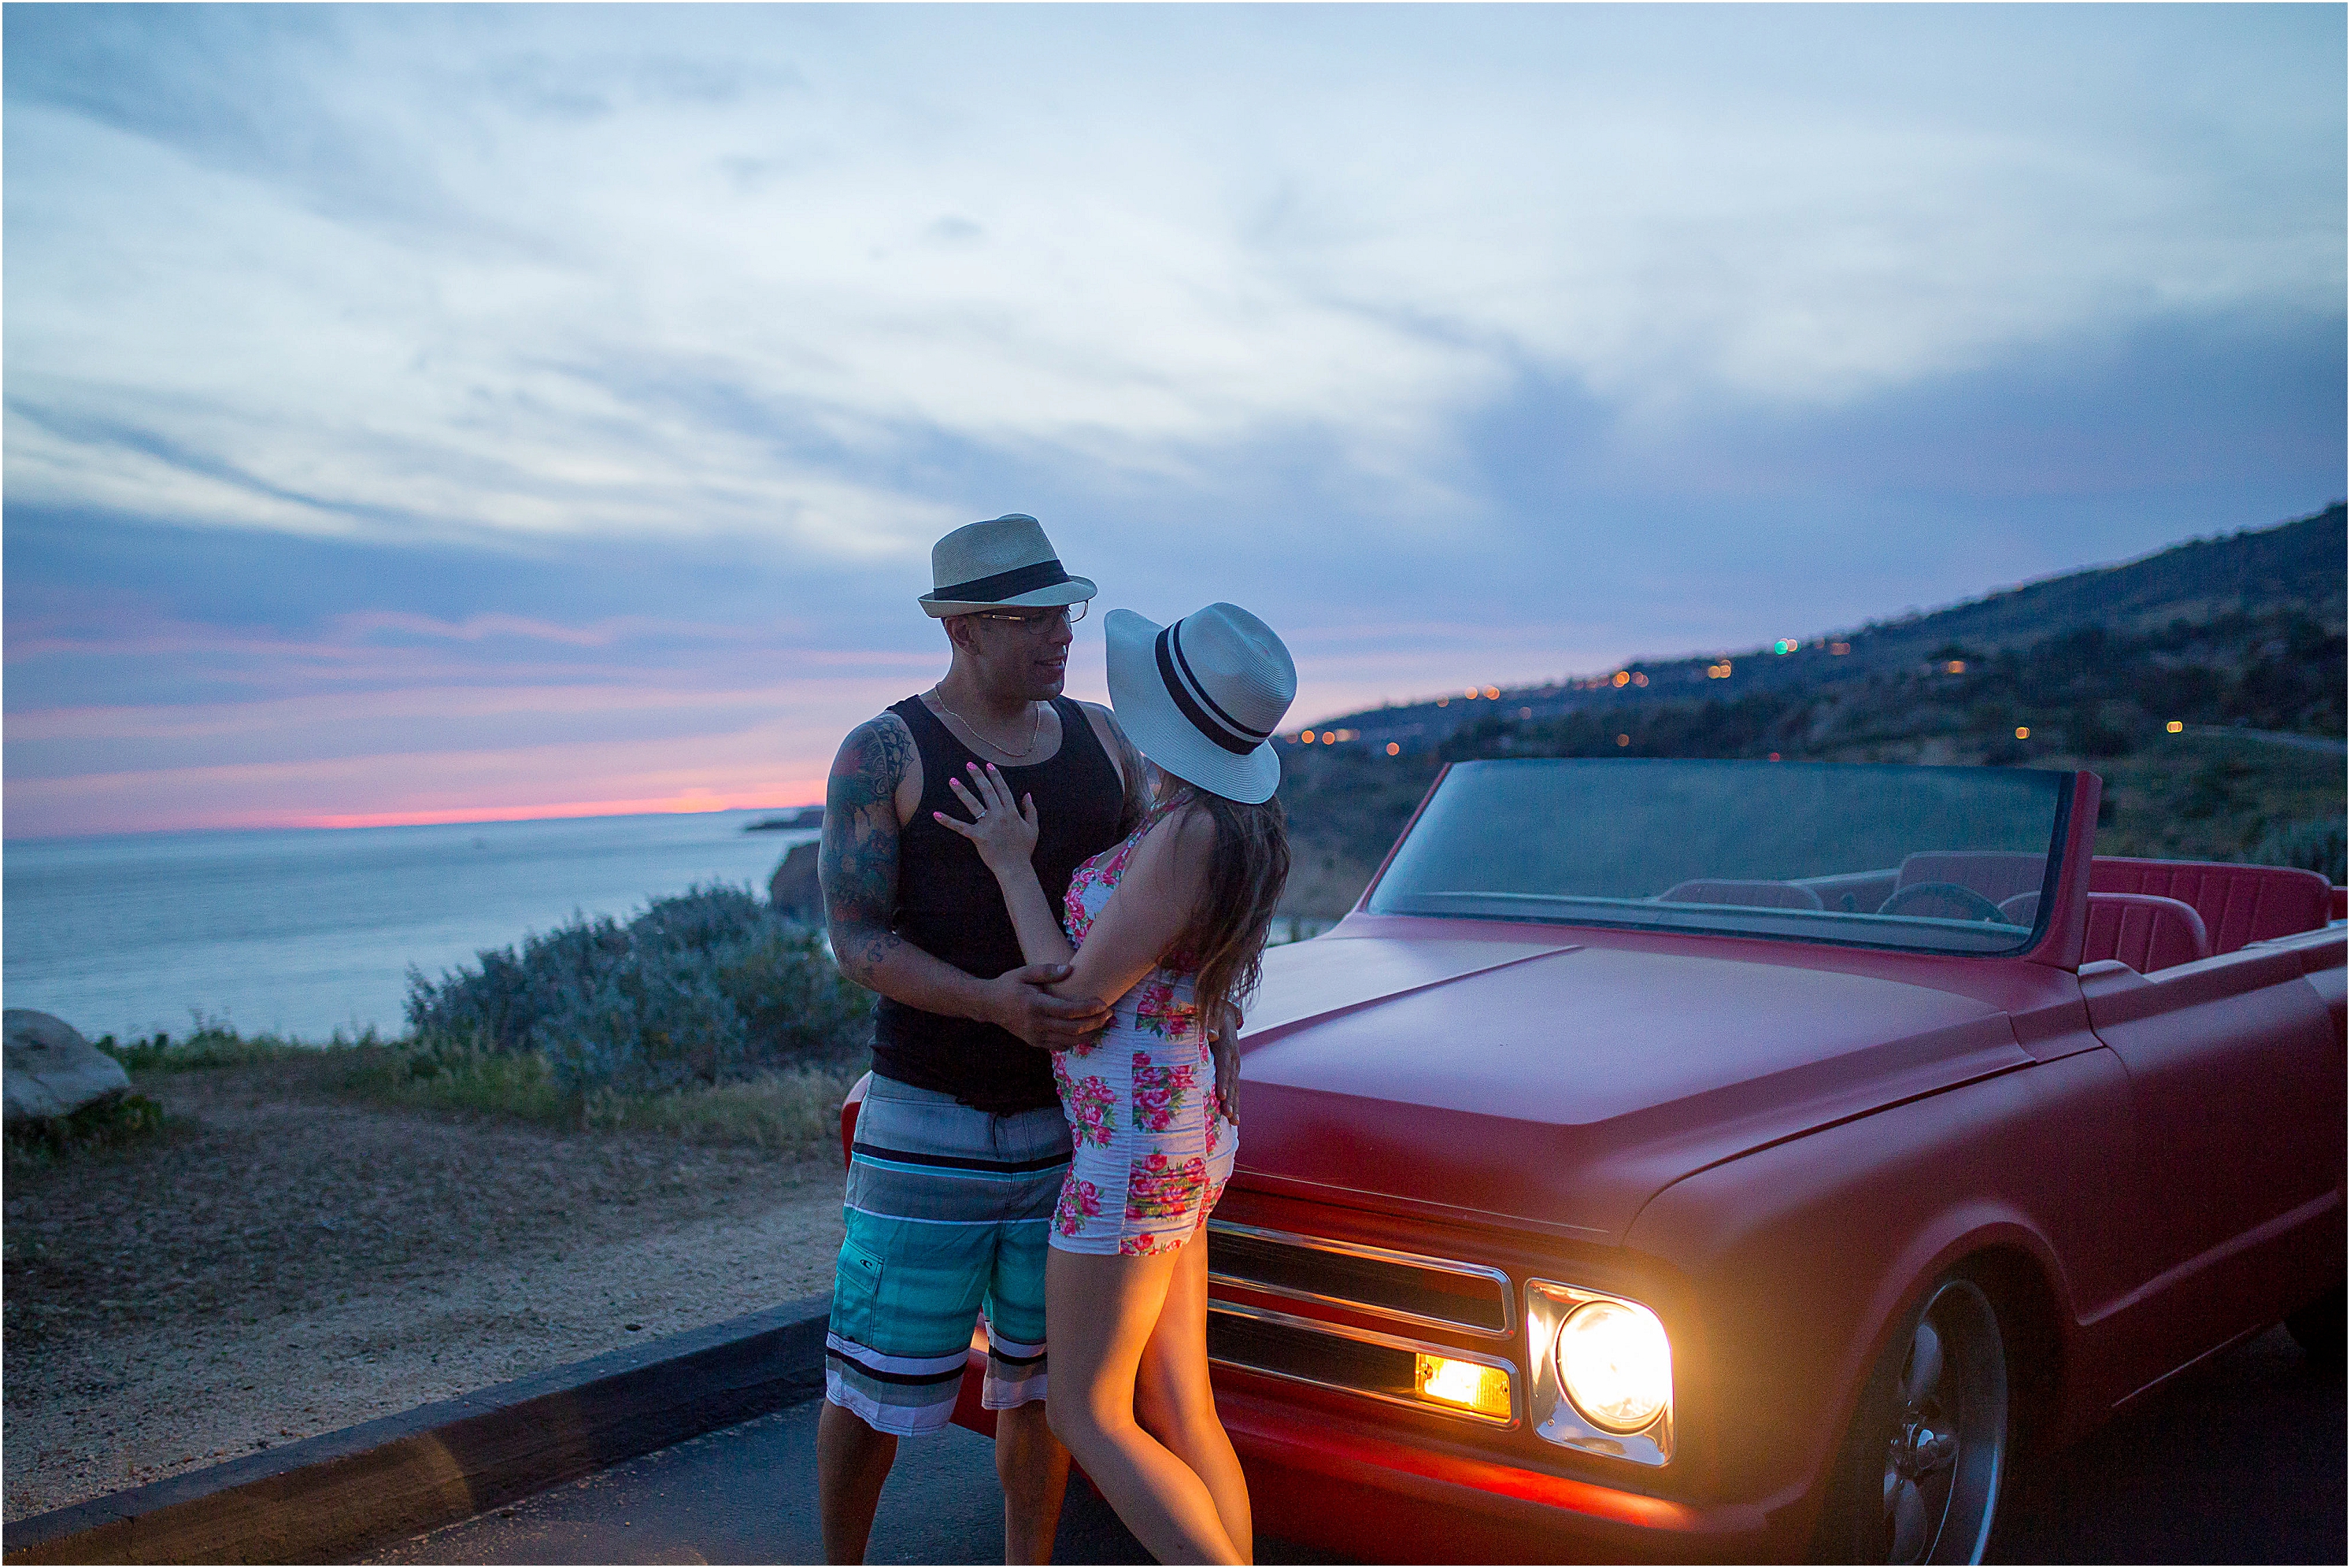 Couple poses in front of Chevy blazer for photos at dusk in palos verdes, ca.